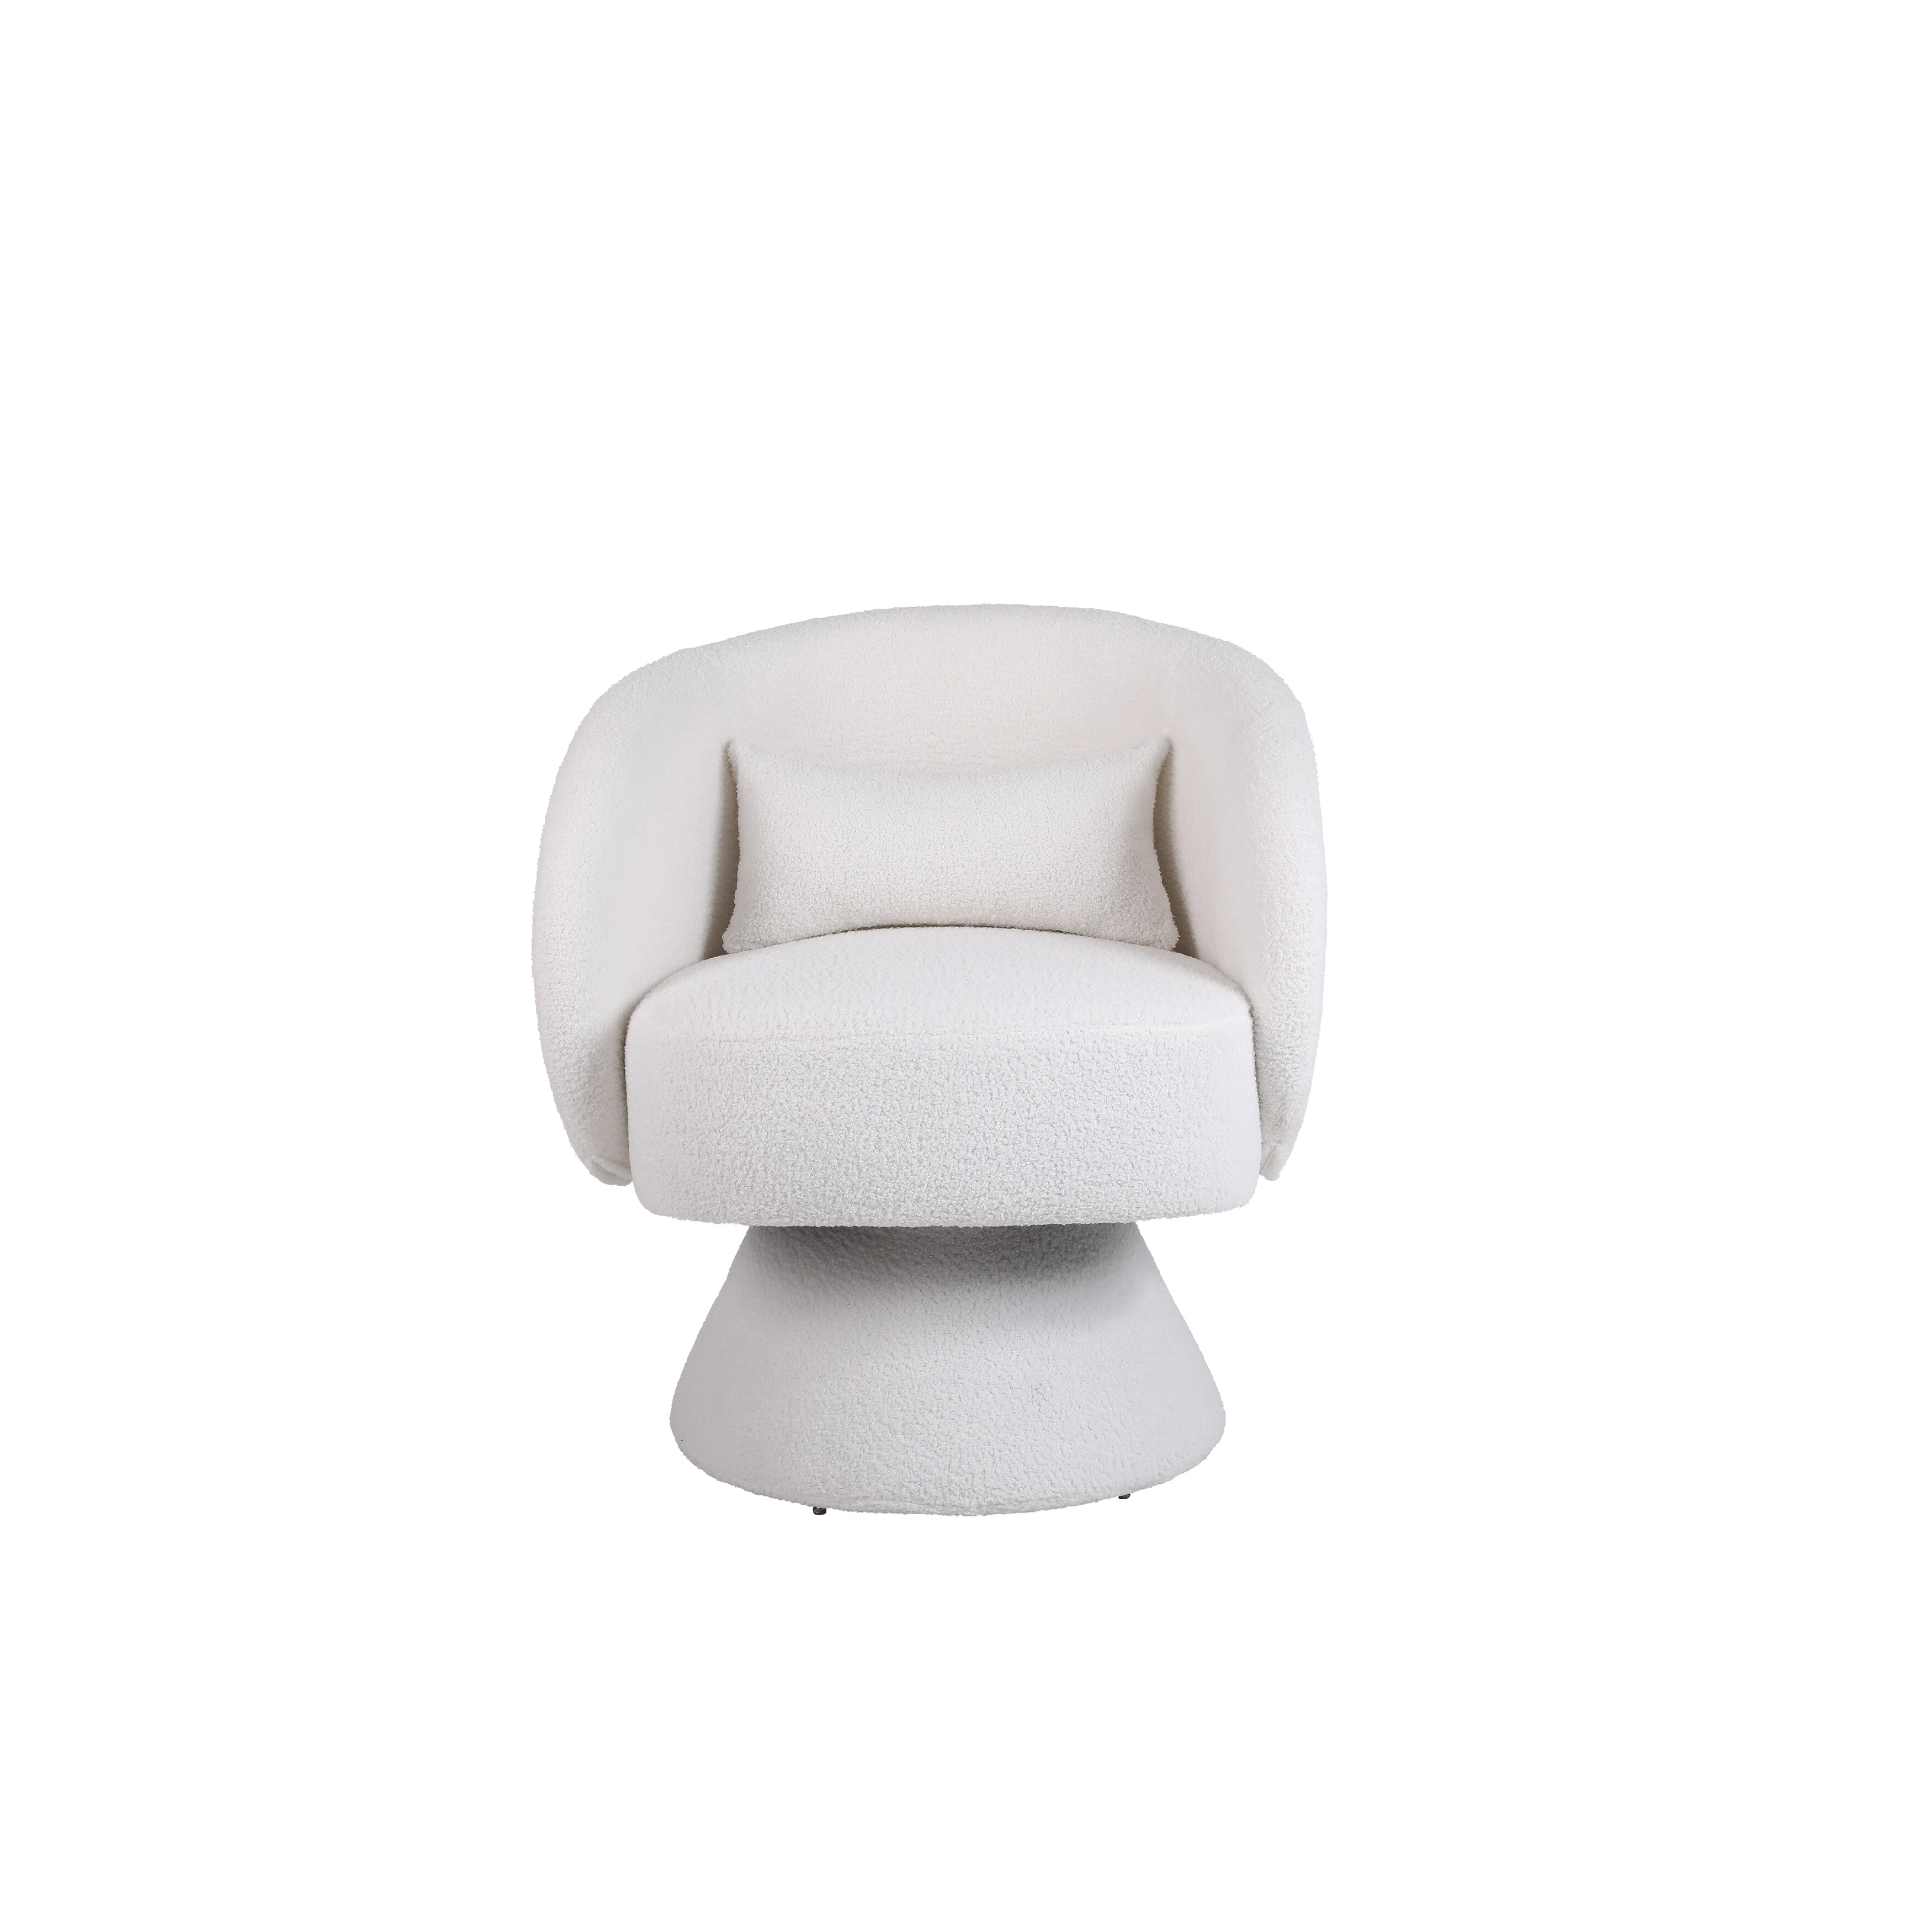 https://ak1.ostkcdn.com/images/products/is/images/direct/d244c608fdb8fe74617b297959488abb45a3773a/Modern-Accent-Chair-Swivel-Armchair%2C-Round-Fabric-Barrel-Chairs-Single-Sofa-Lounge-Chair-with-Small-Pillow-for-Living-Room.jpg